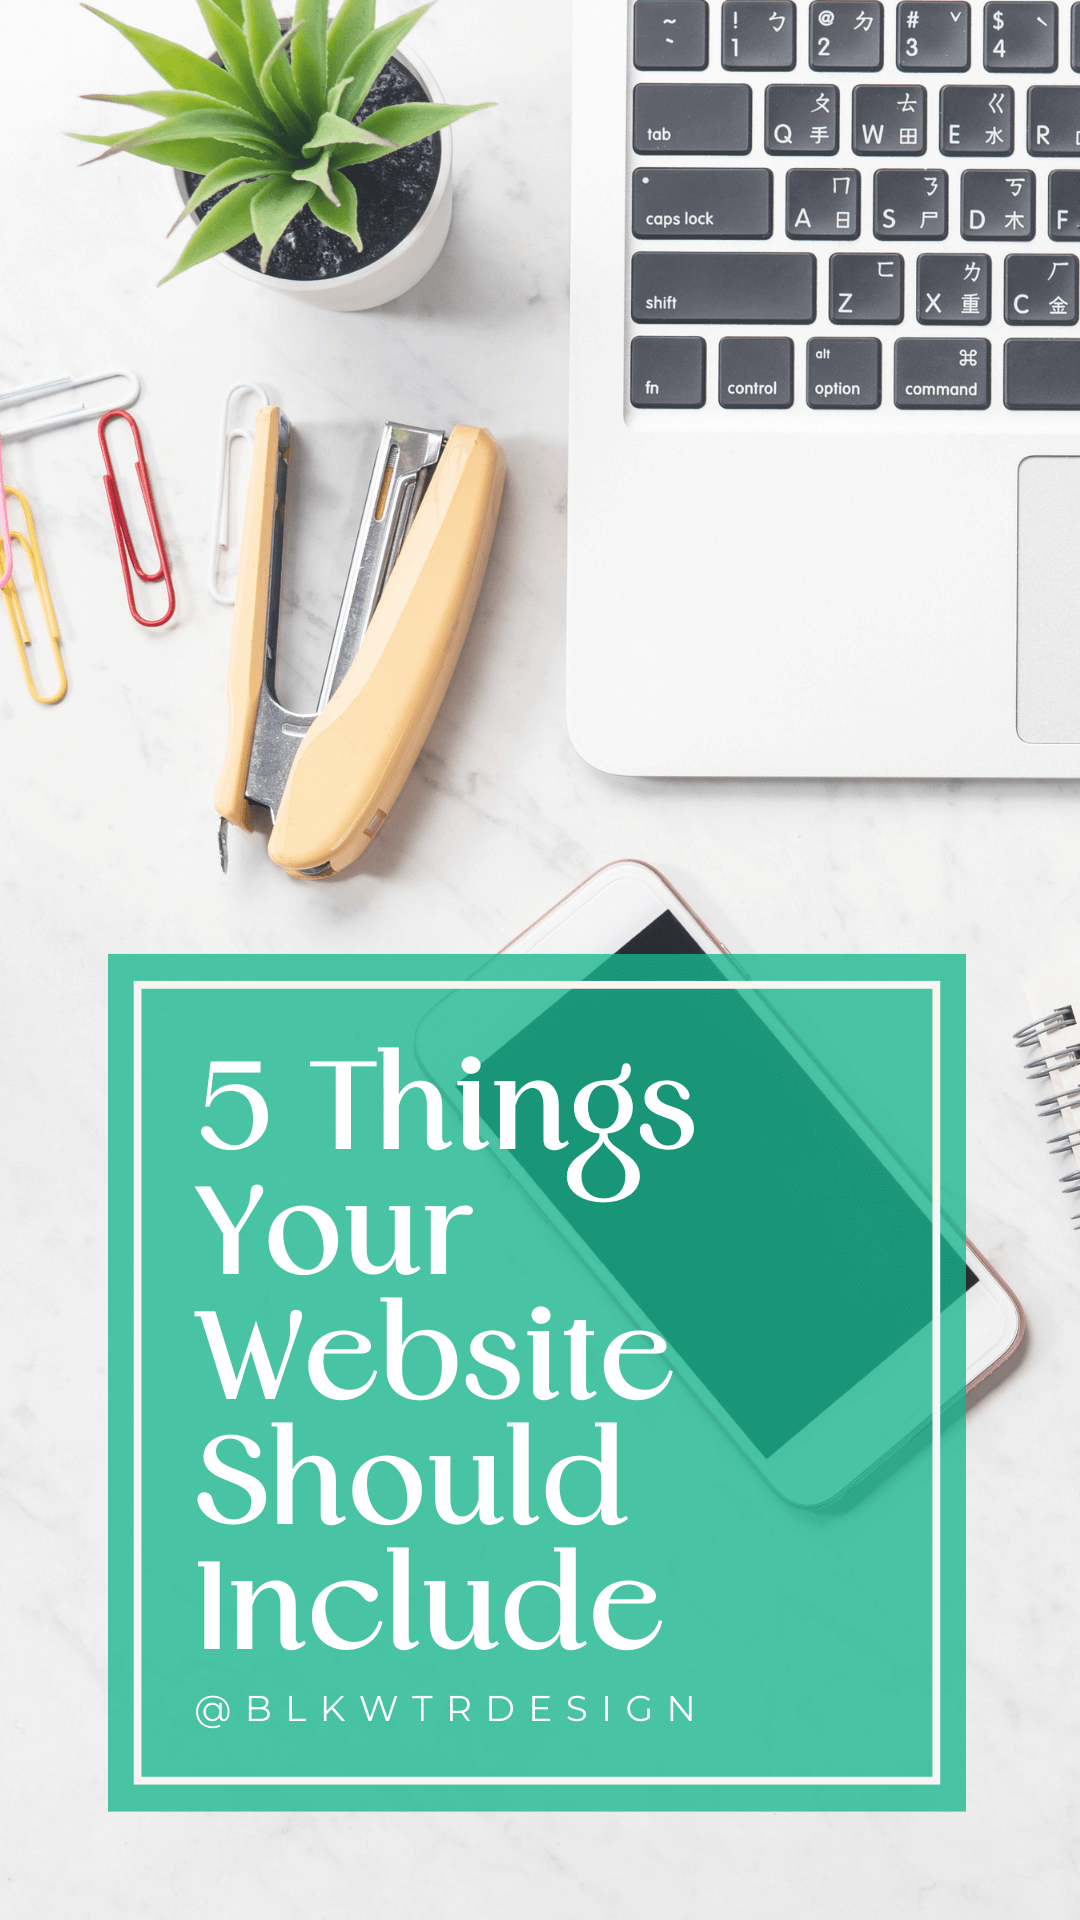 5 Things Your Website Should Include